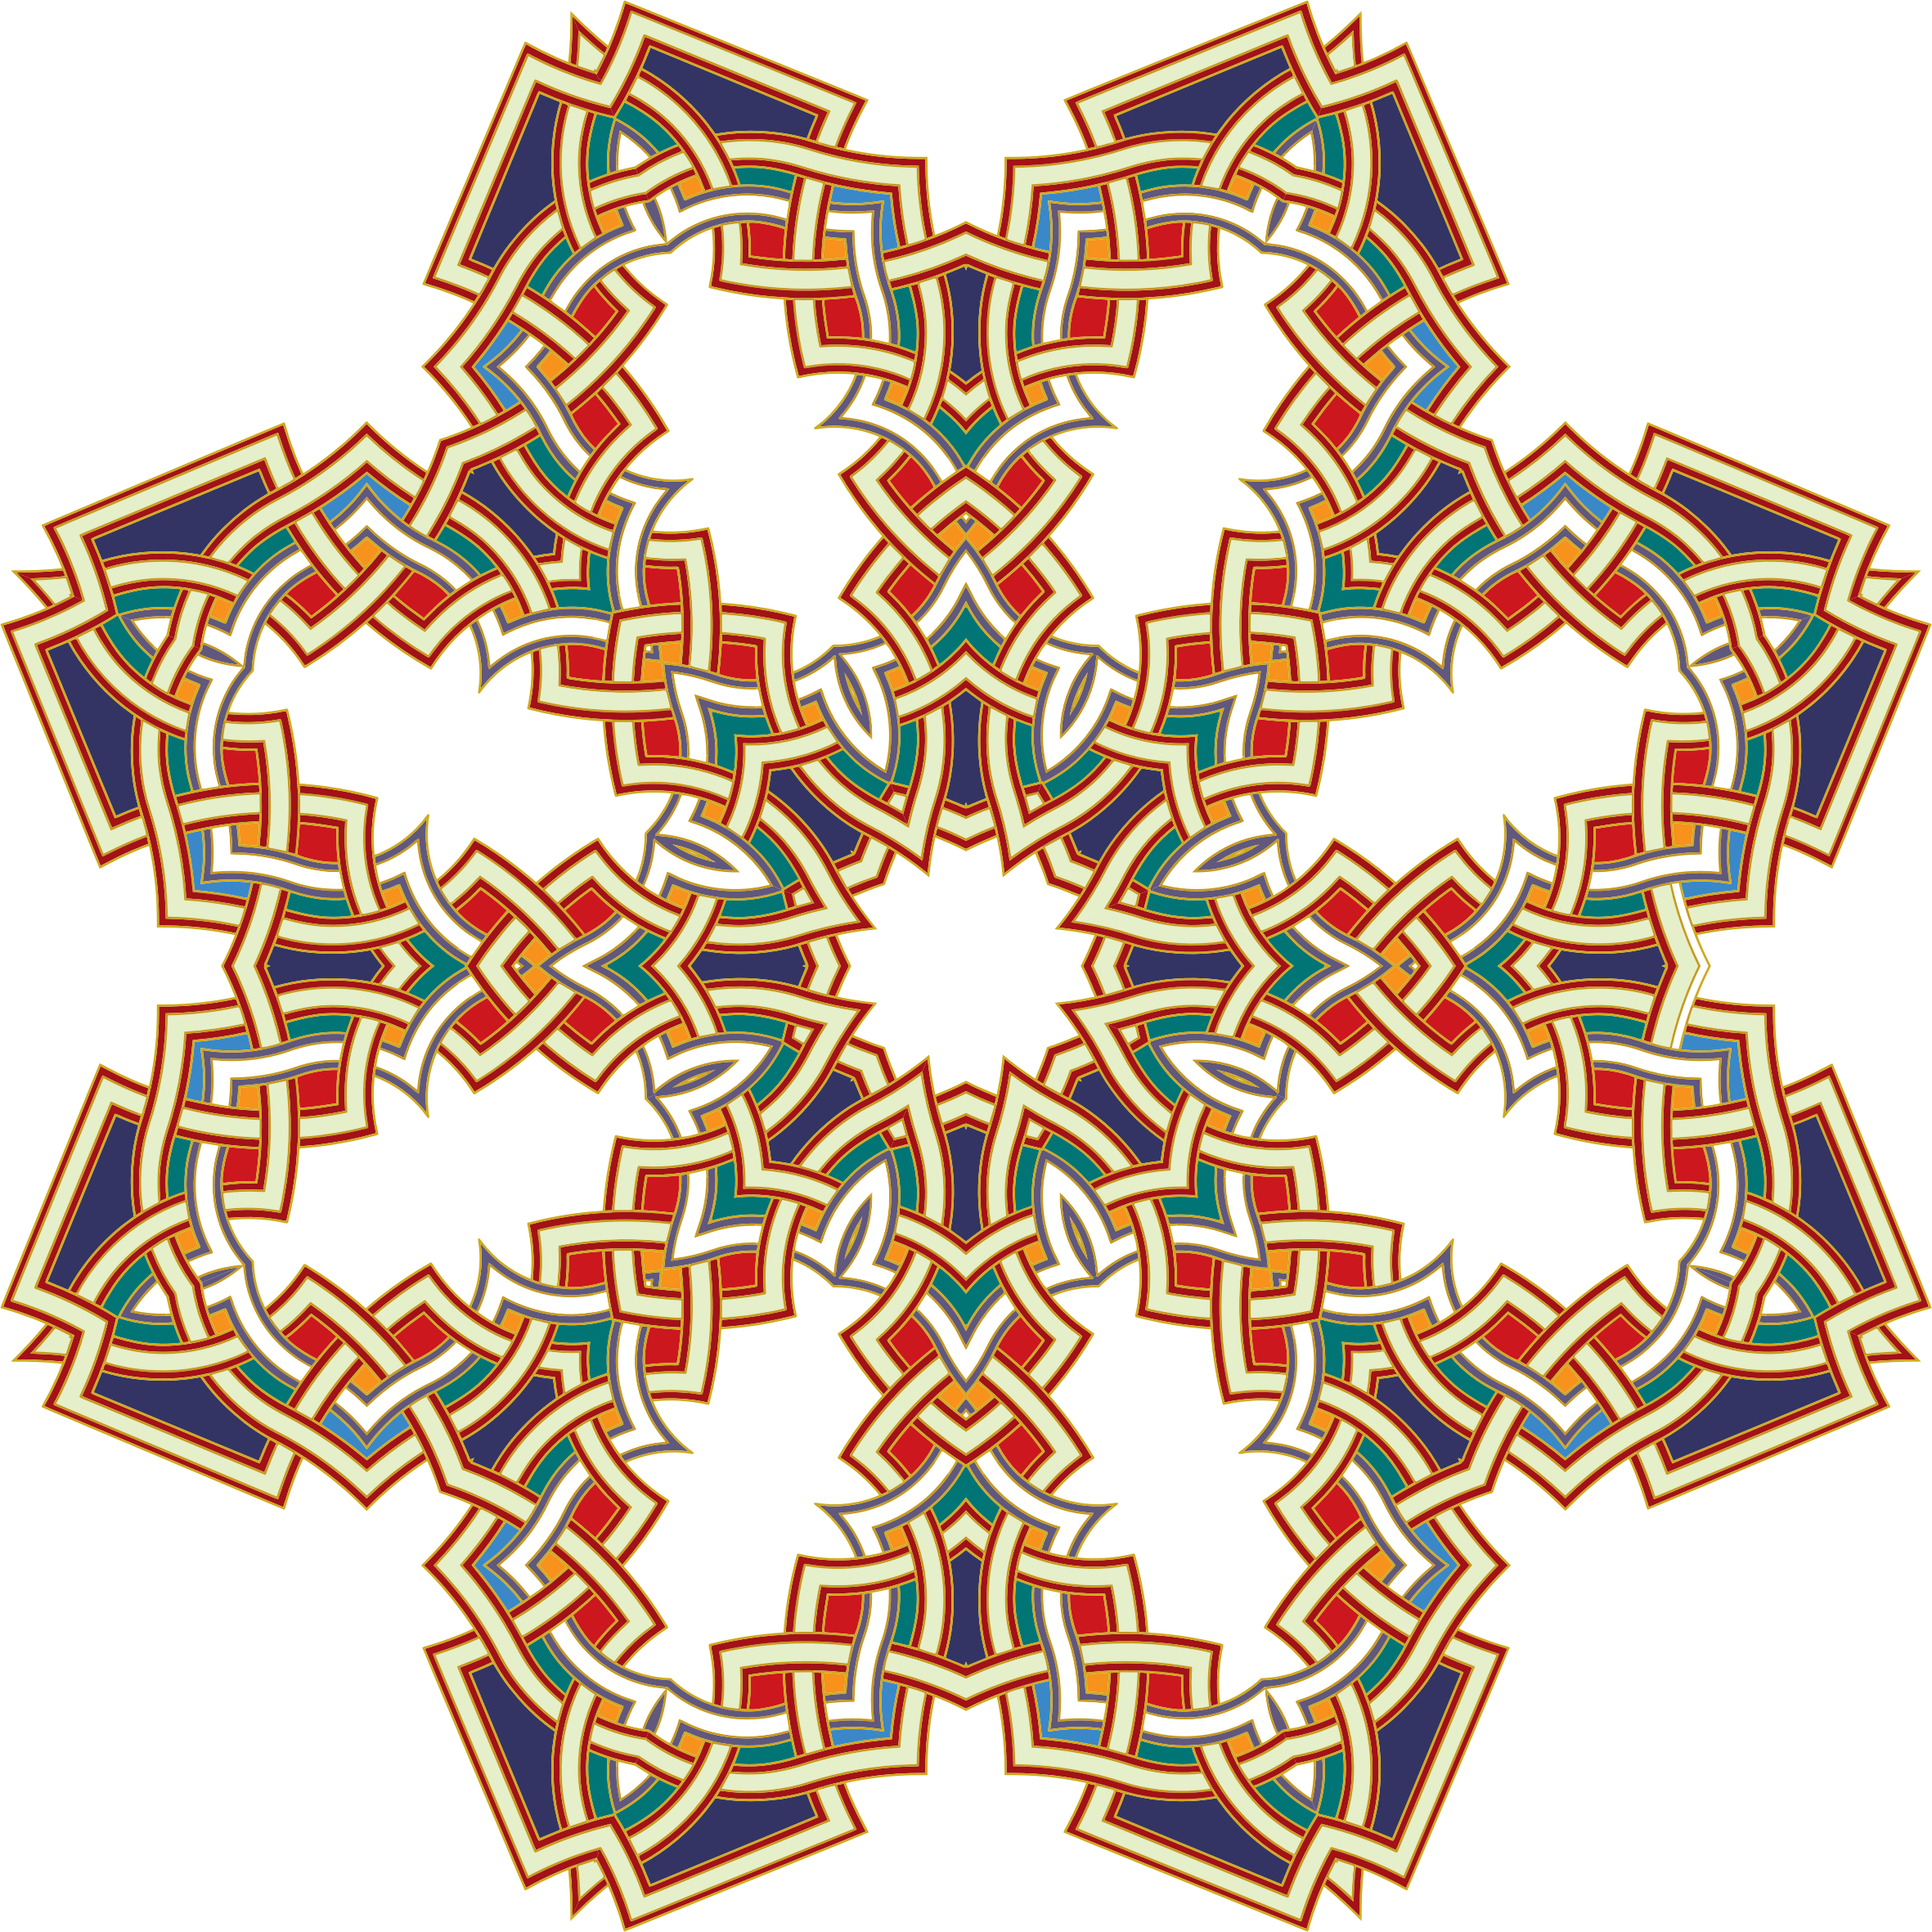 Design clipart islamic, Design islamic Transparent FREE for download on